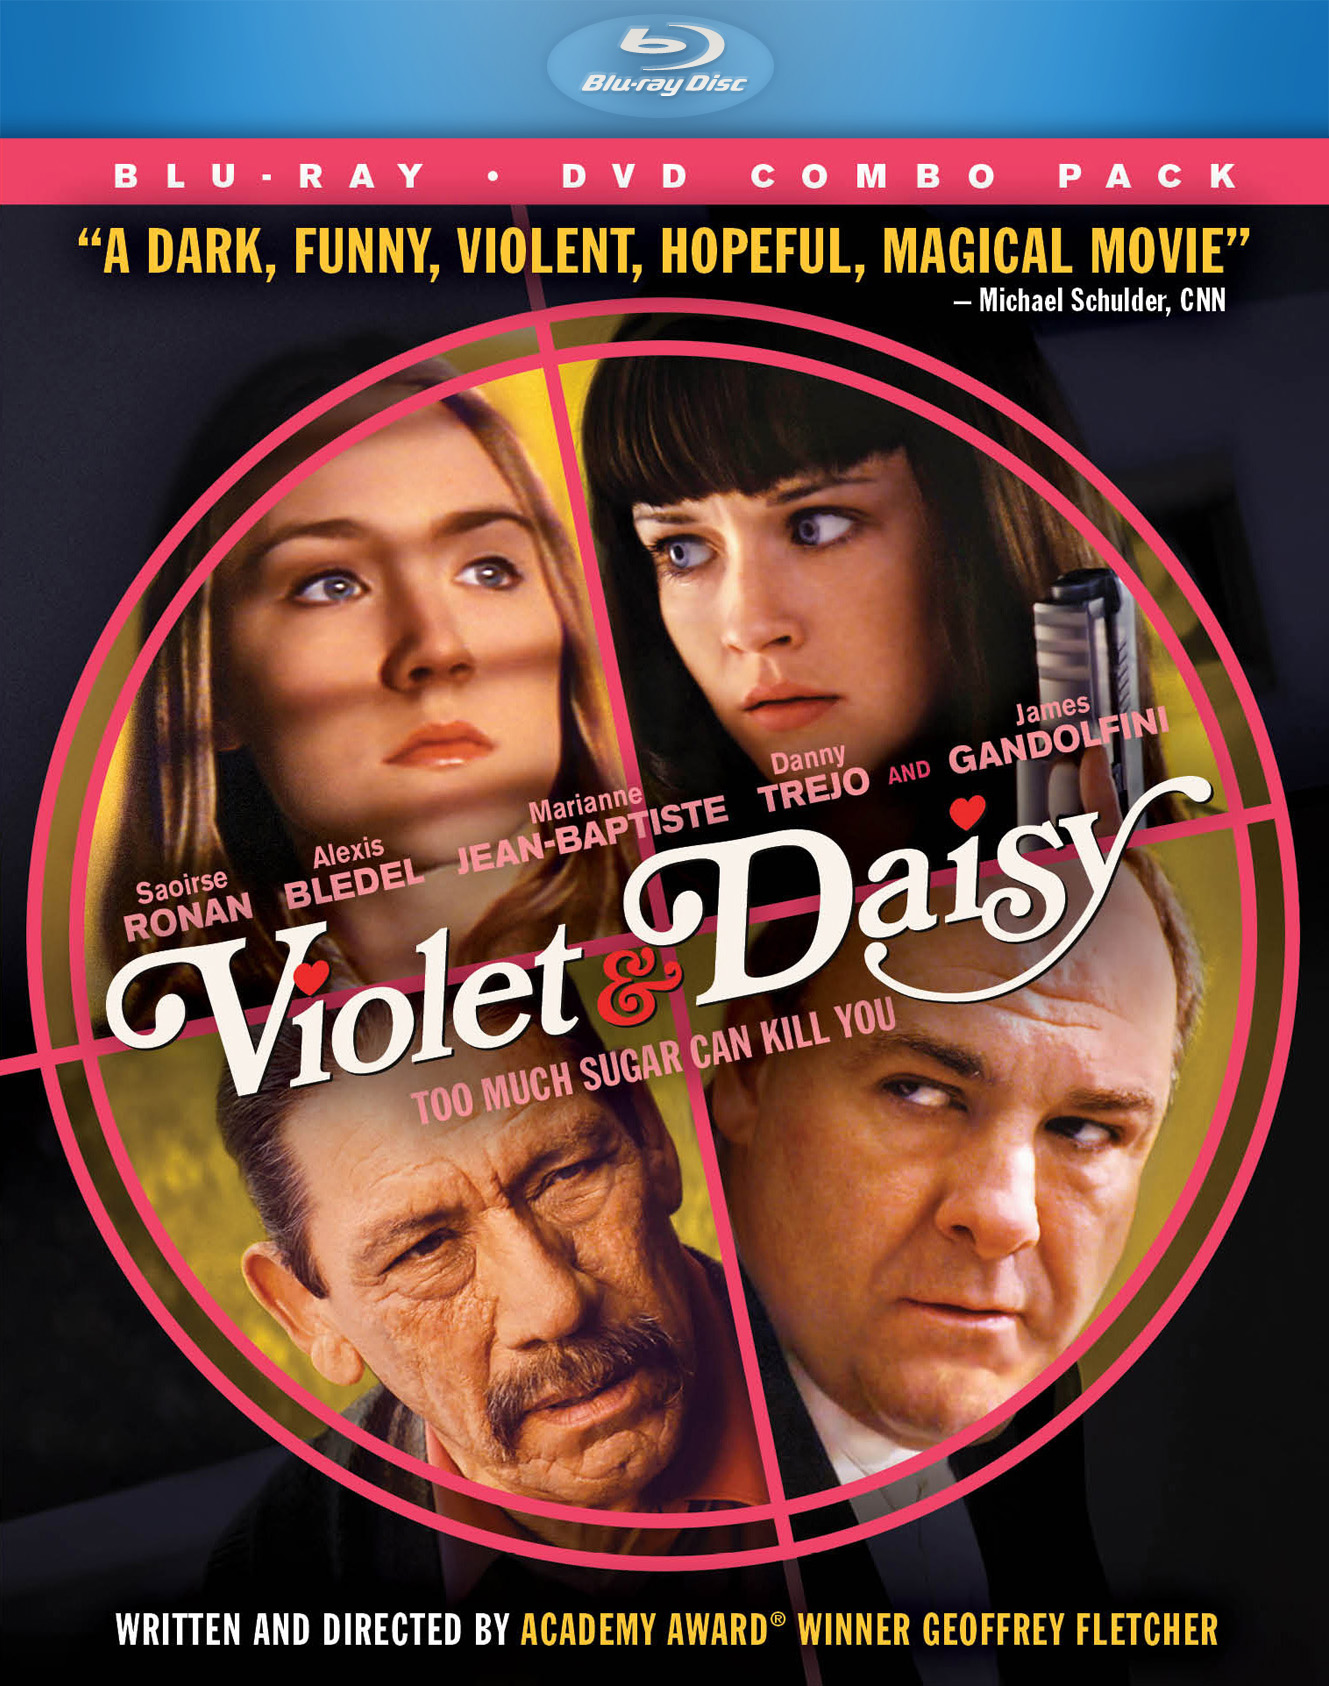 Violet & Daisy Blu-ray Review